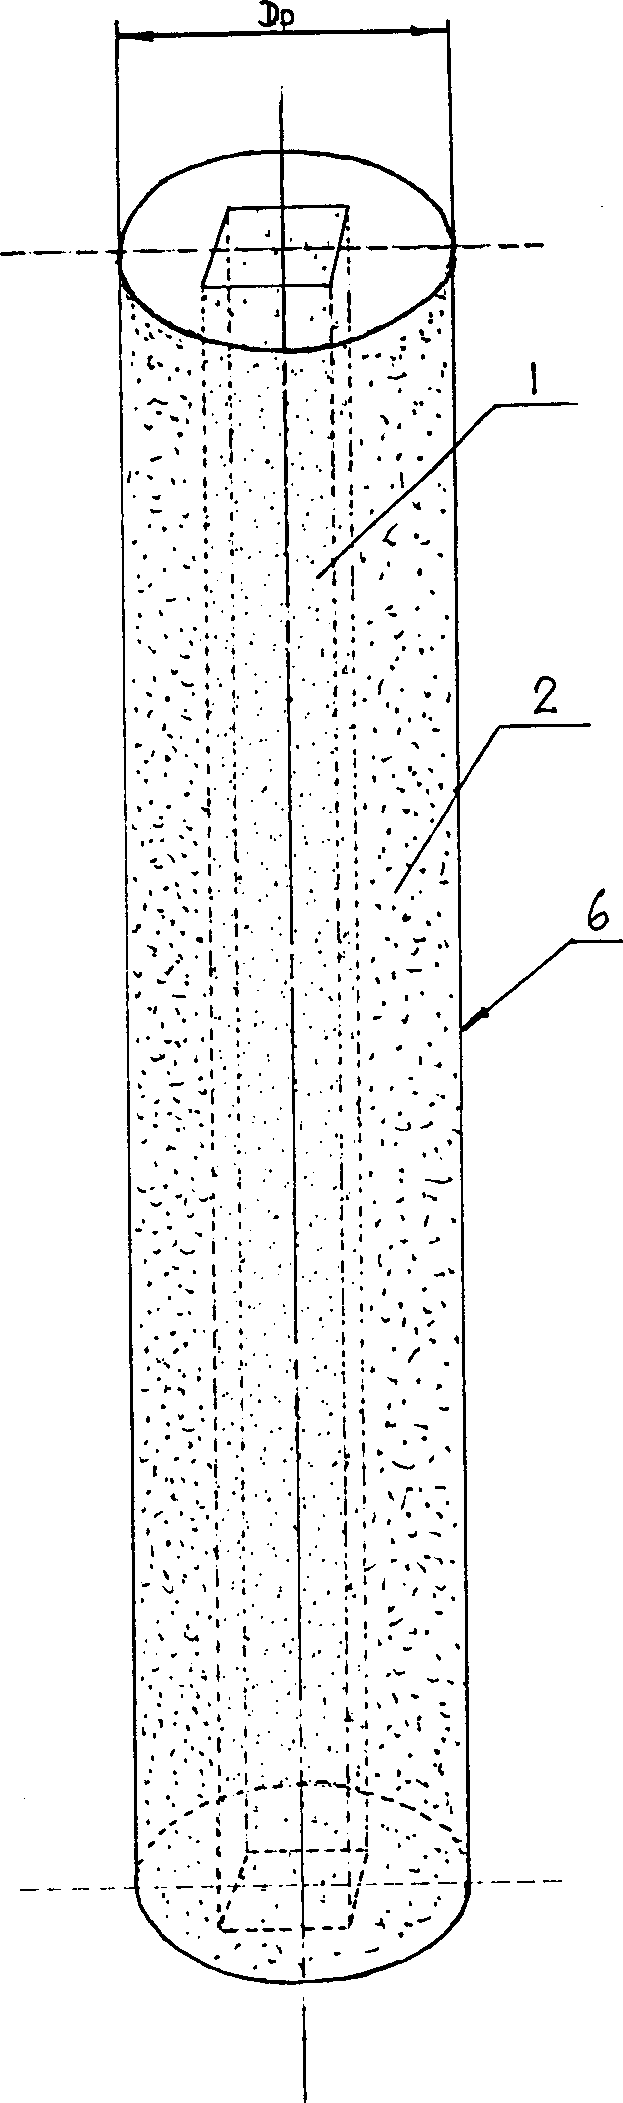 Novel method for reinforcing deep soft foundition-cencrete core sand stone pile compound foundition method